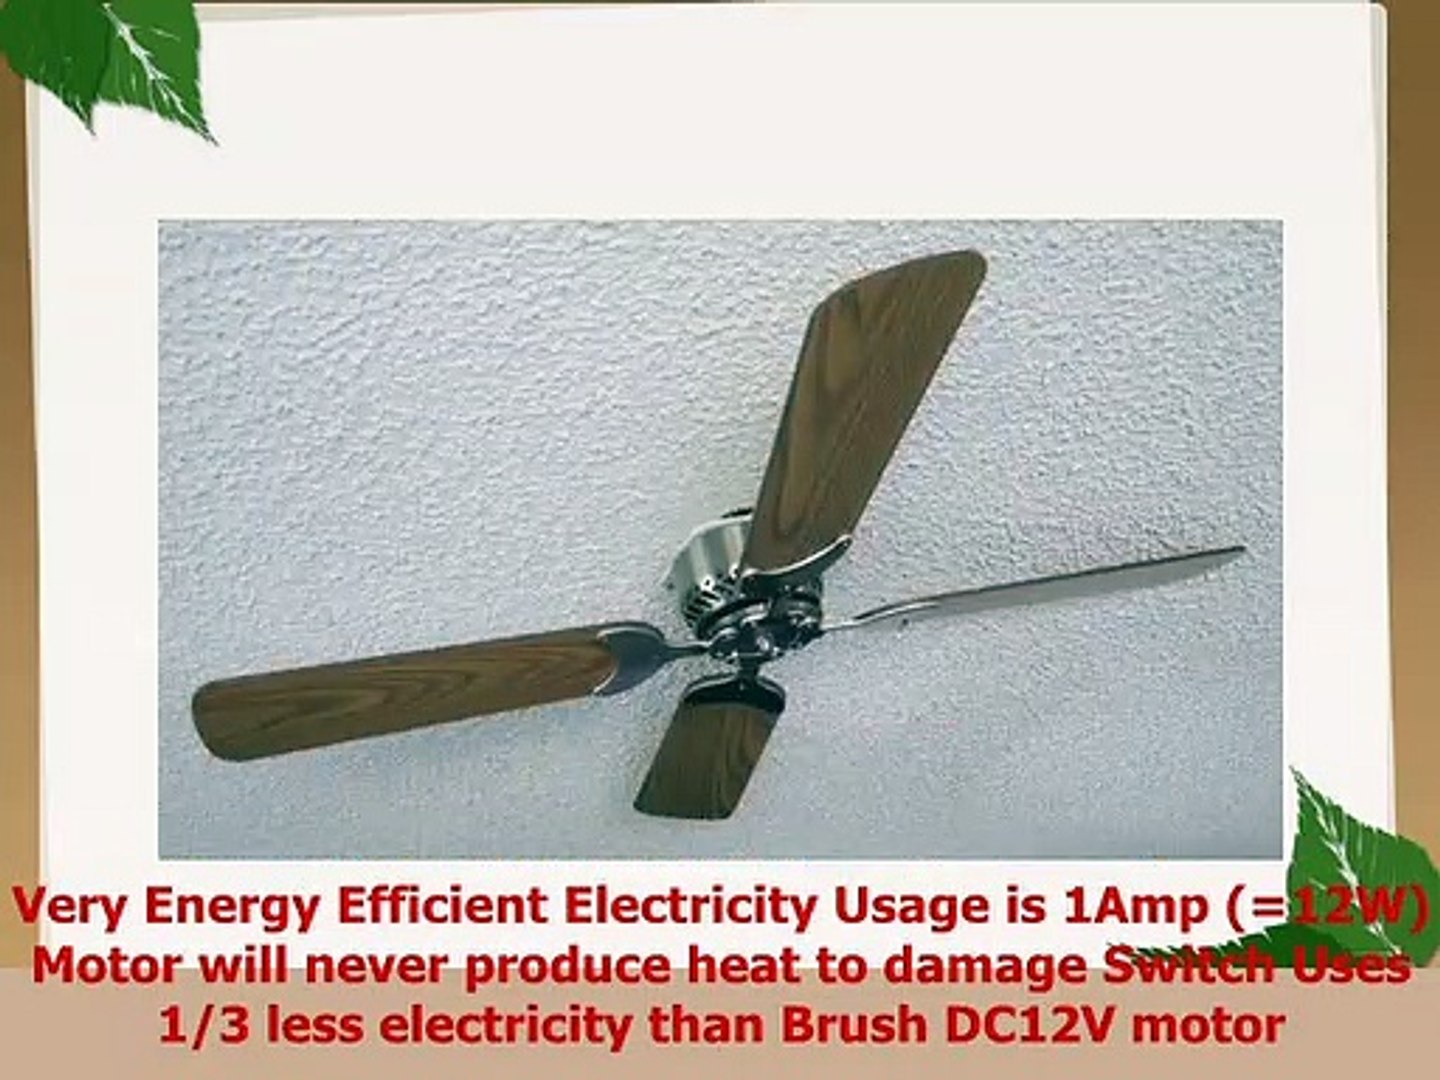 Global Electric 42inch Nonbrush Ceiling Fan For Rv Brushed Nickel